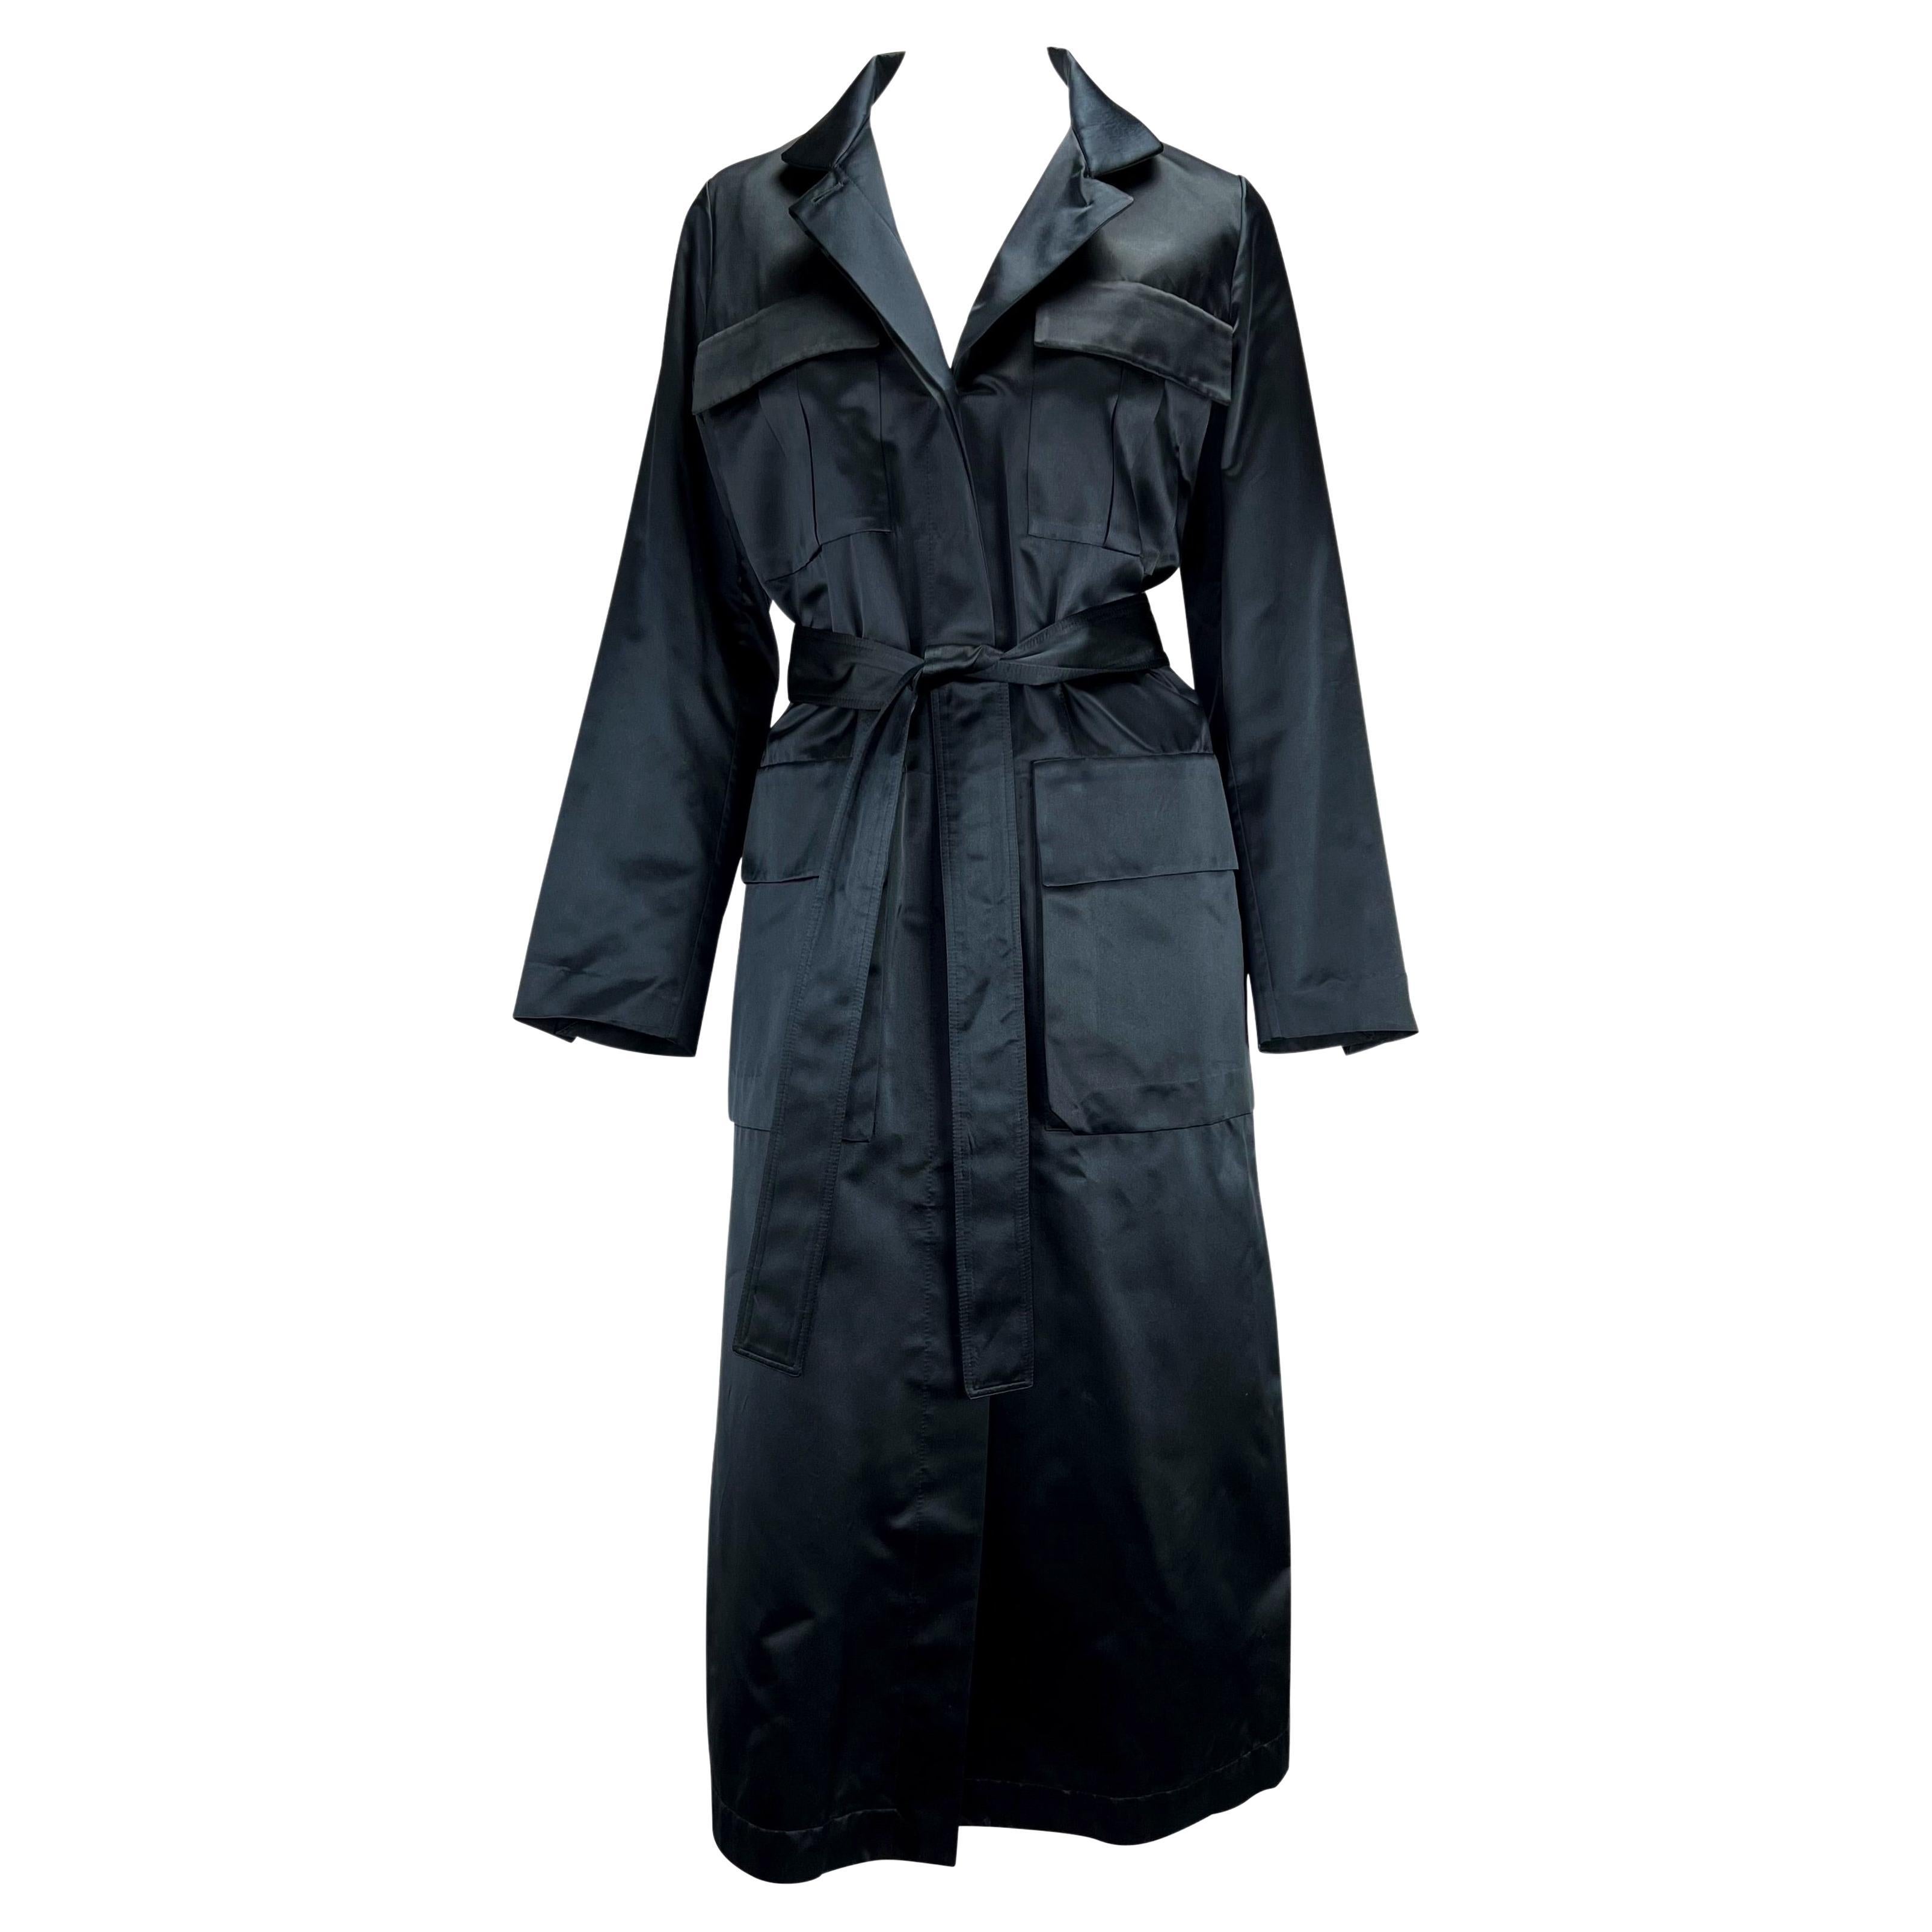 S/S 2001 Gucci by Tom Ford Navy Satin Trench Coat